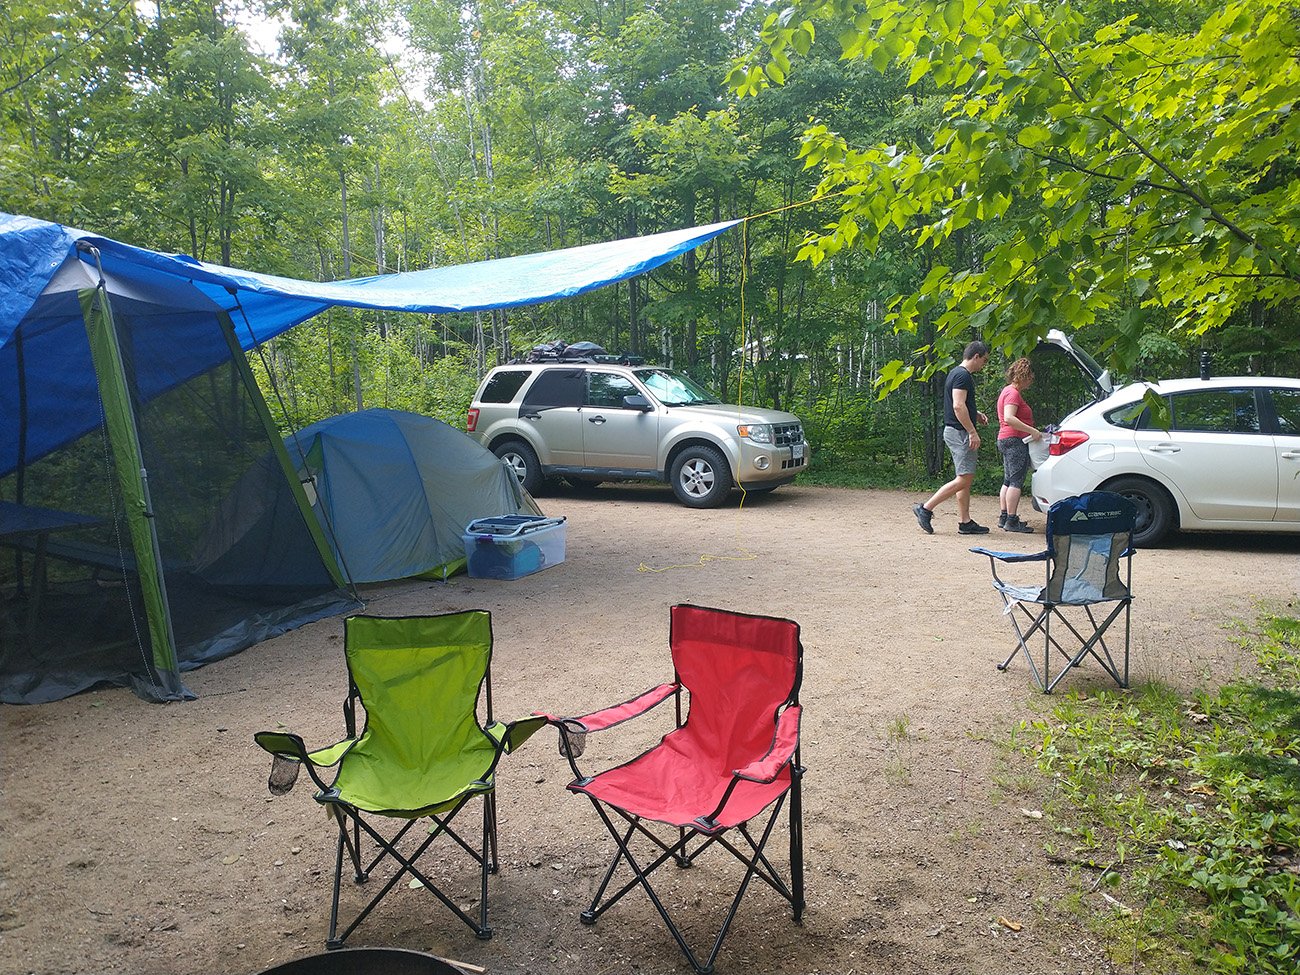 Campsite for 3 people. Notice the tarp and mosquito net over the picnic table. Die mosquitos.